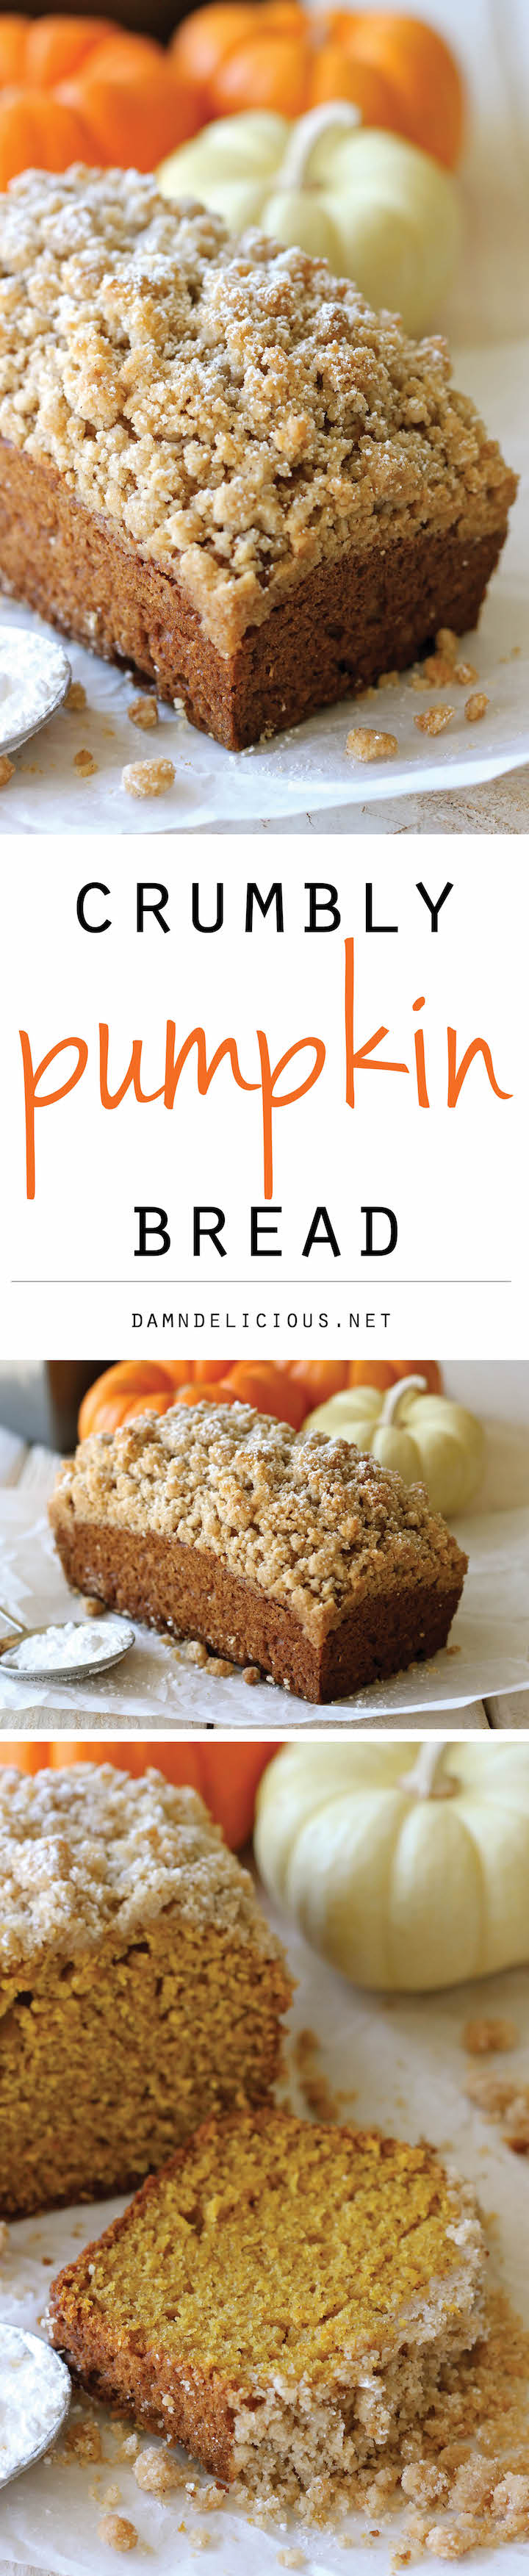 Crumbly Pumpkin Bread - With lightened-up options, this can be eaten guilt-free! And the crumb topping is out of this world amazing!